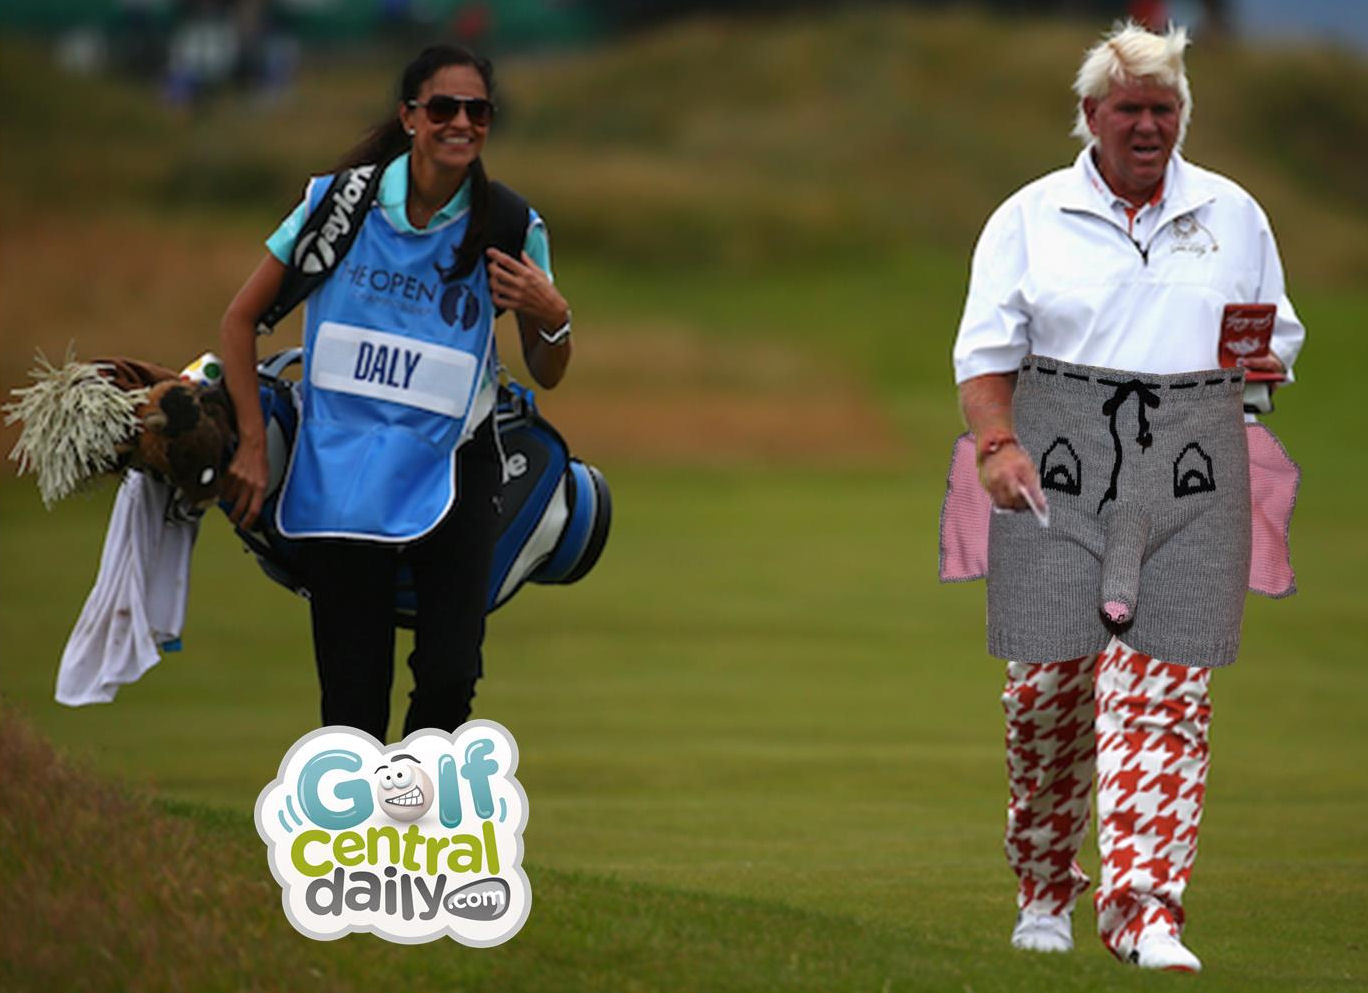 R&A Ask John Daly To Change "Indecent Elephant Trousers" Before Teeing